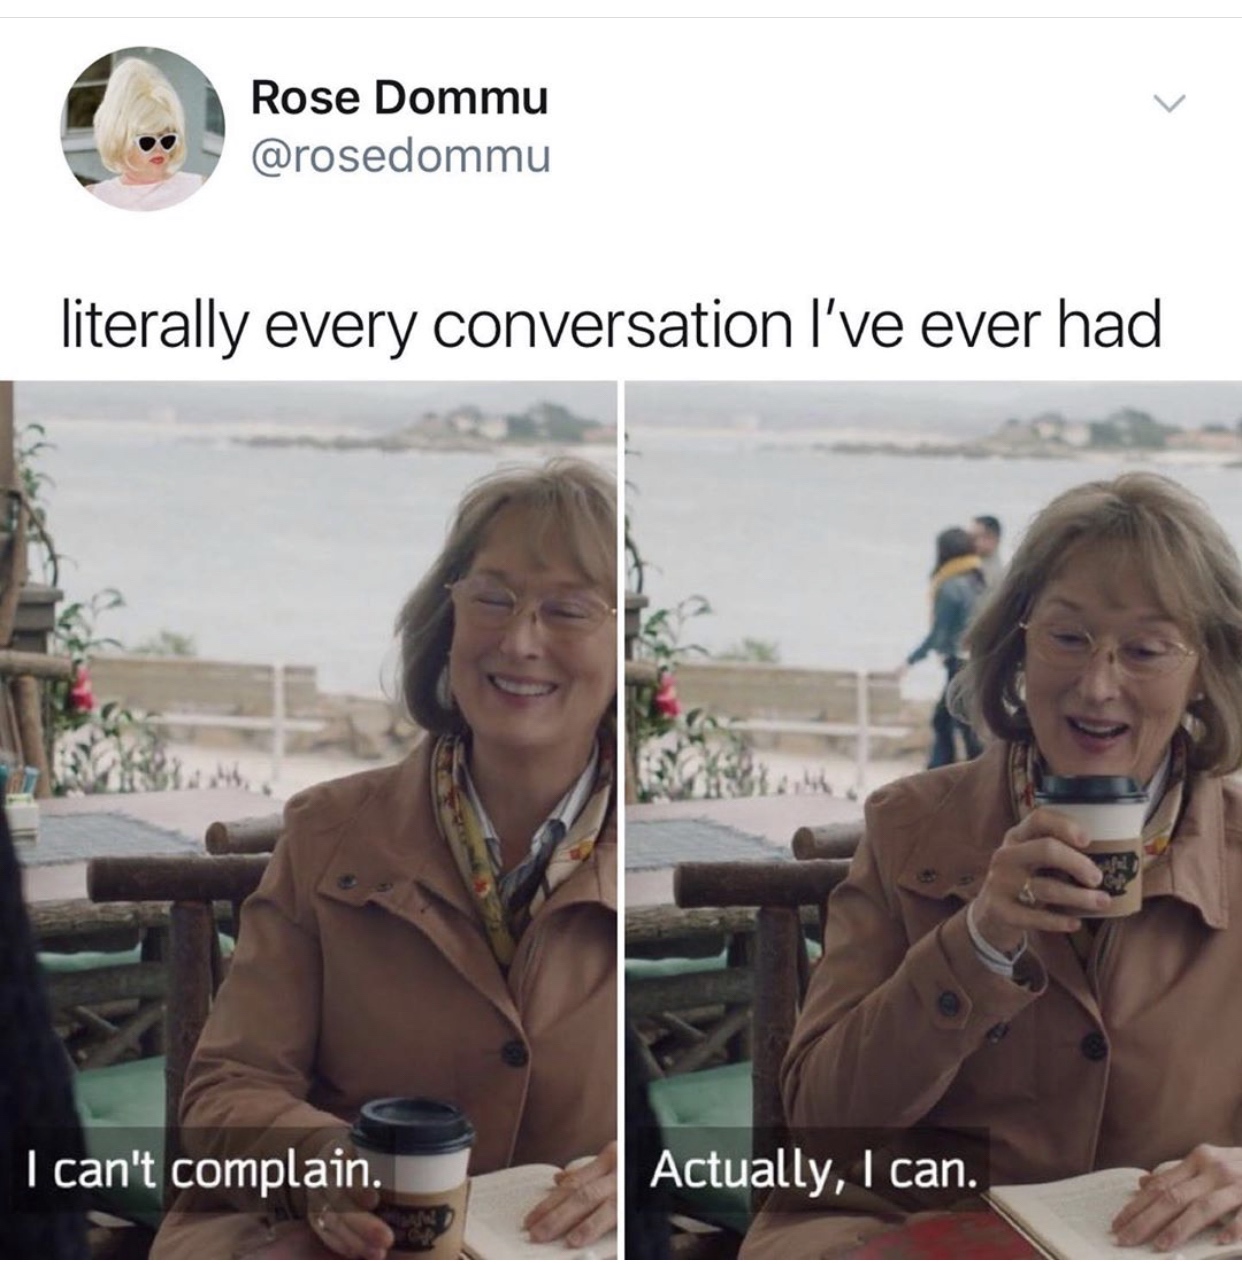 funny memes 2019 - Rose Dommu literally every conversation I've ever had I can't complain. Actually, I can.